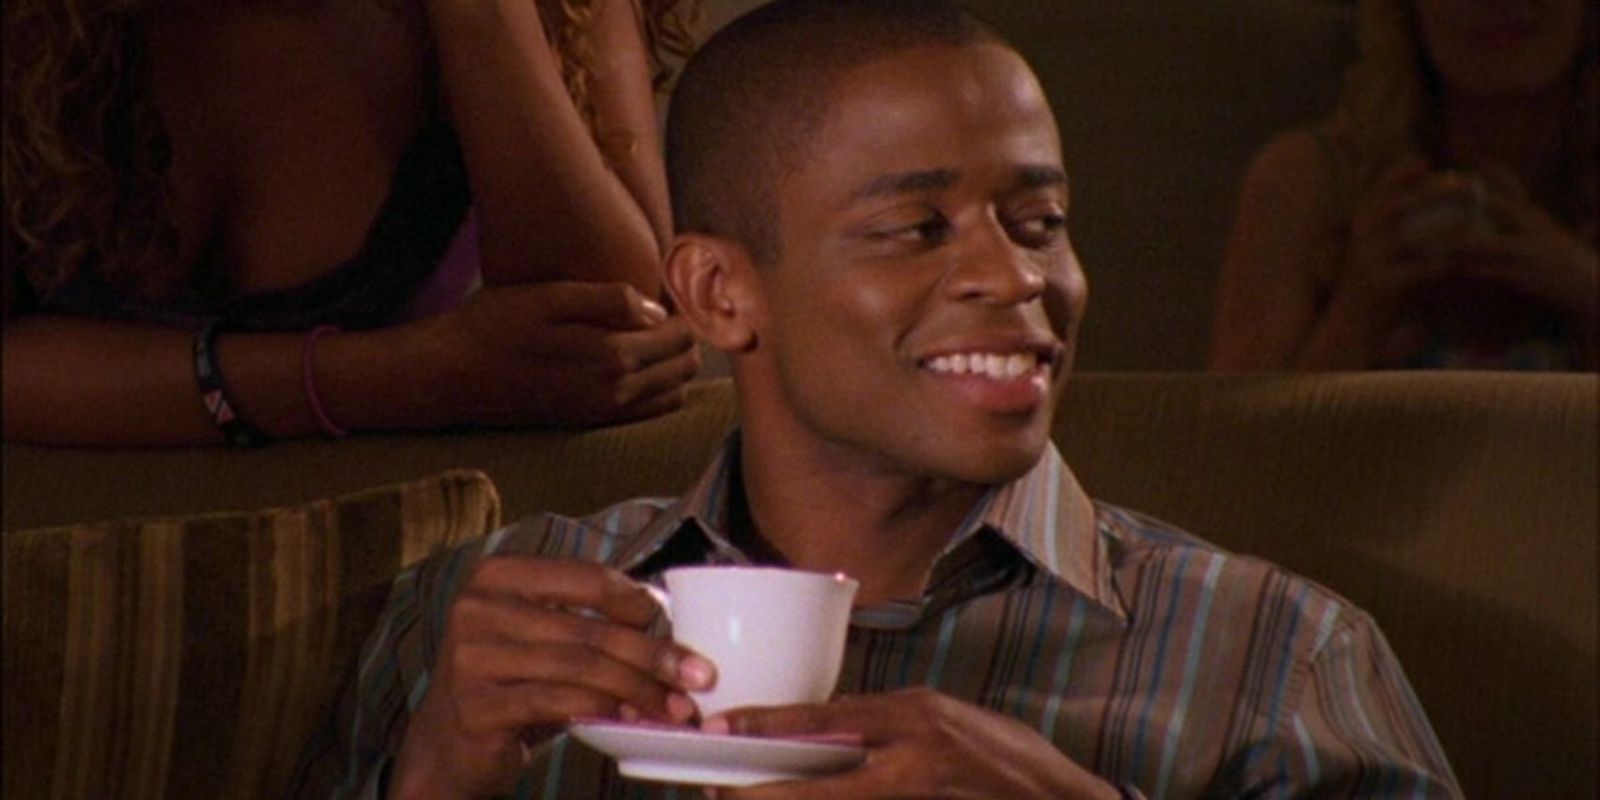 Burton Guster smiles nervously while holding a cup of tea in Psych